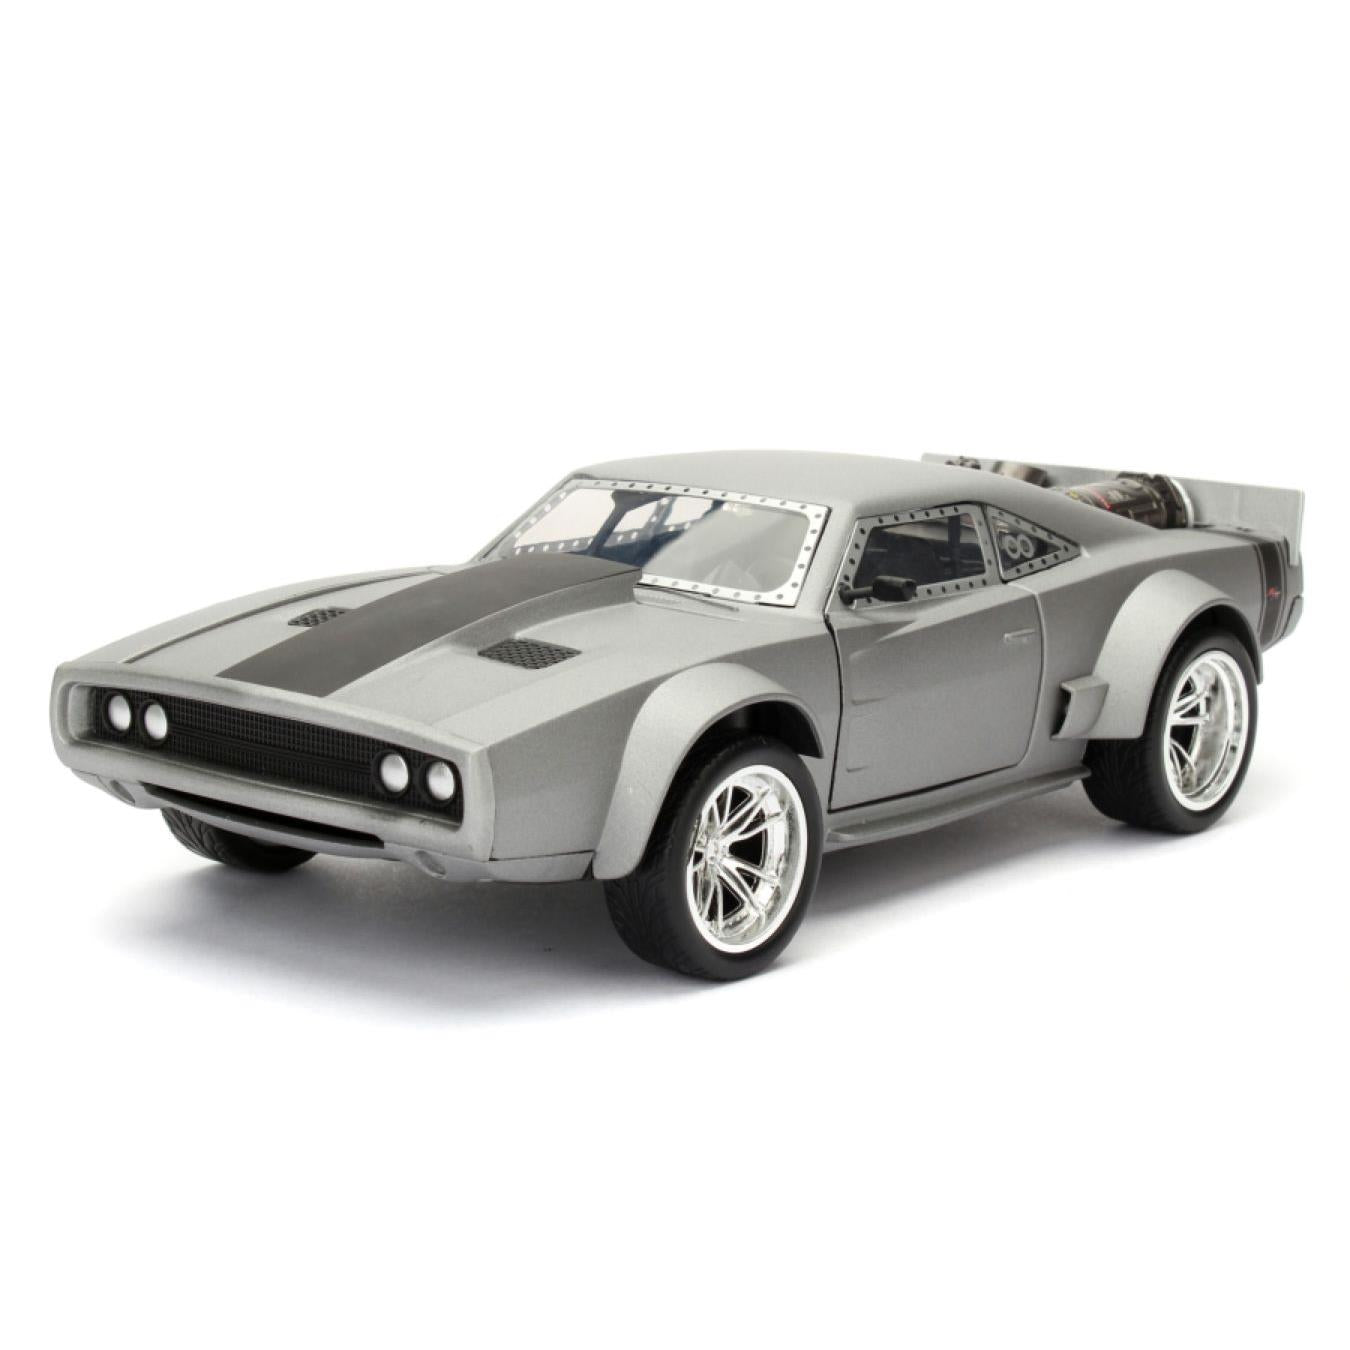 fast and furious - dom's ice charger 1:24 scale hollywood ride vehicle replica